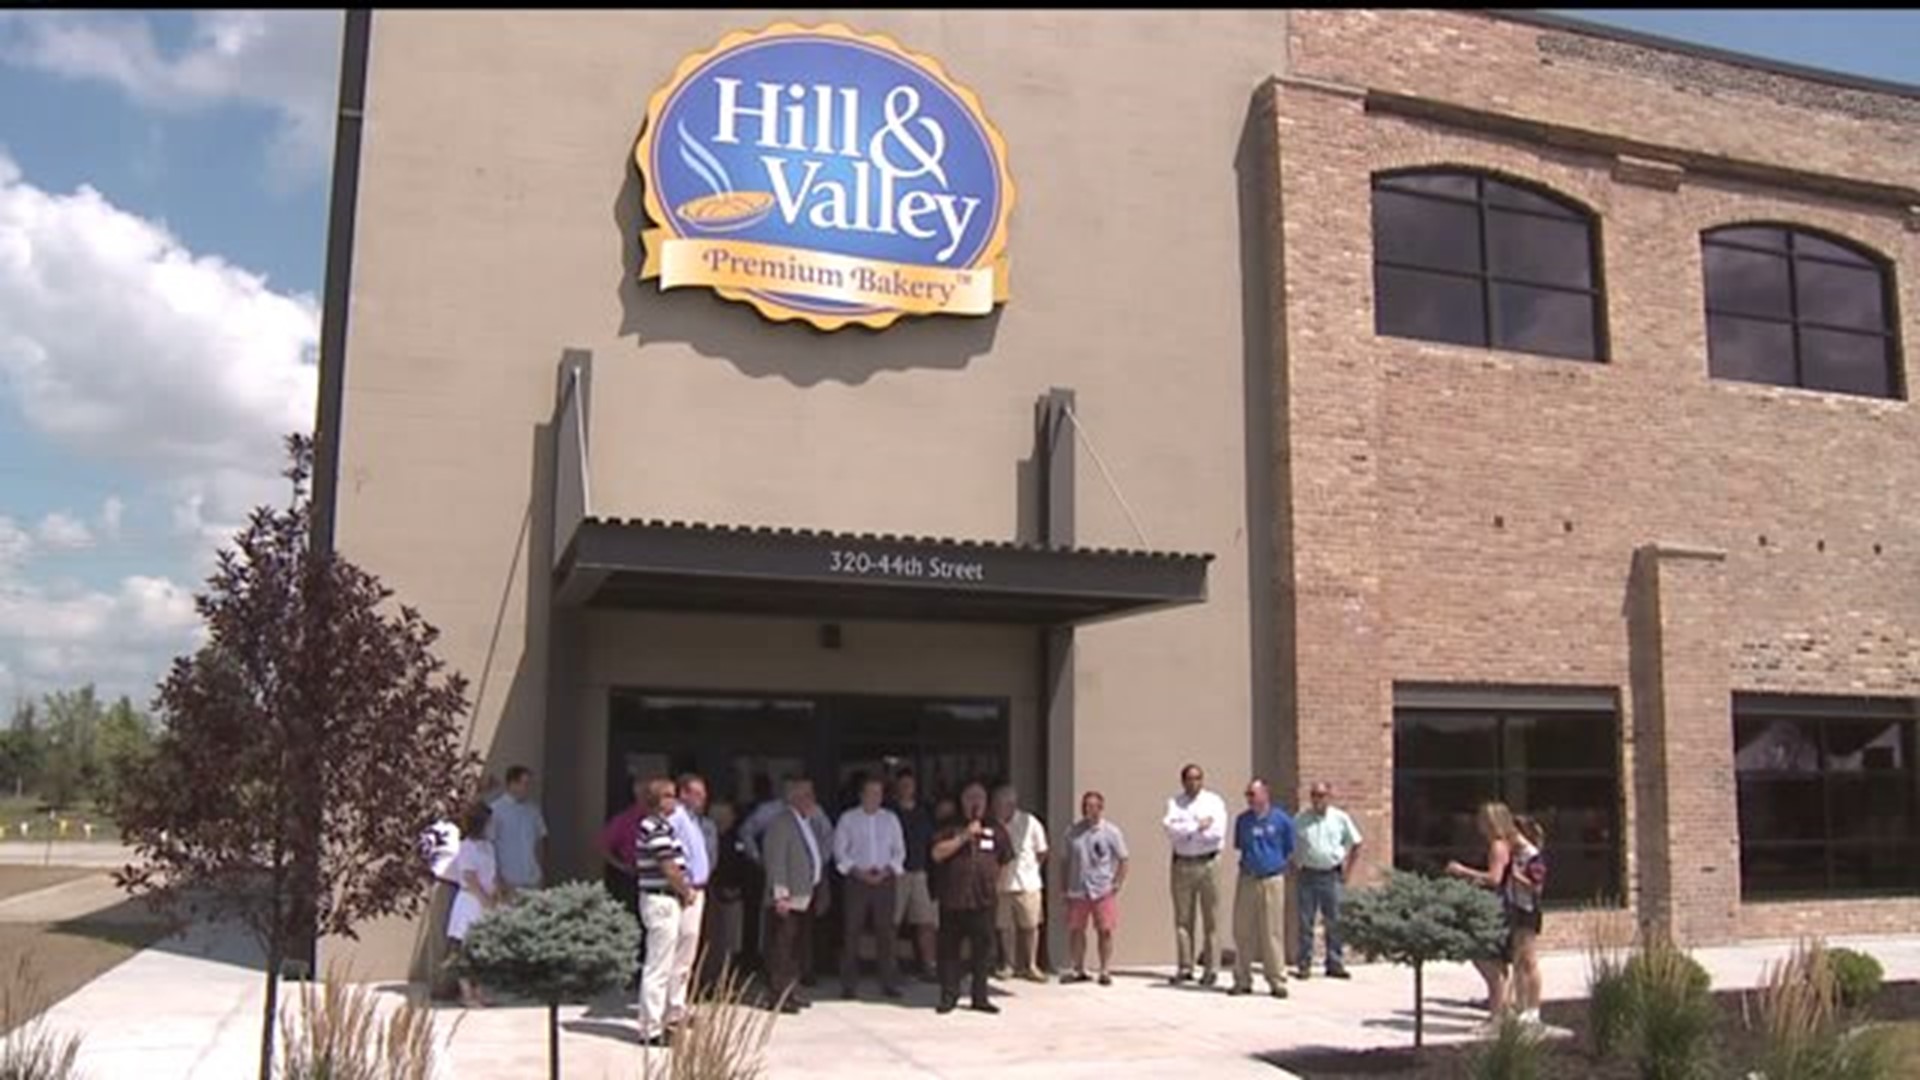 Hill and Valley in Rock Island sold